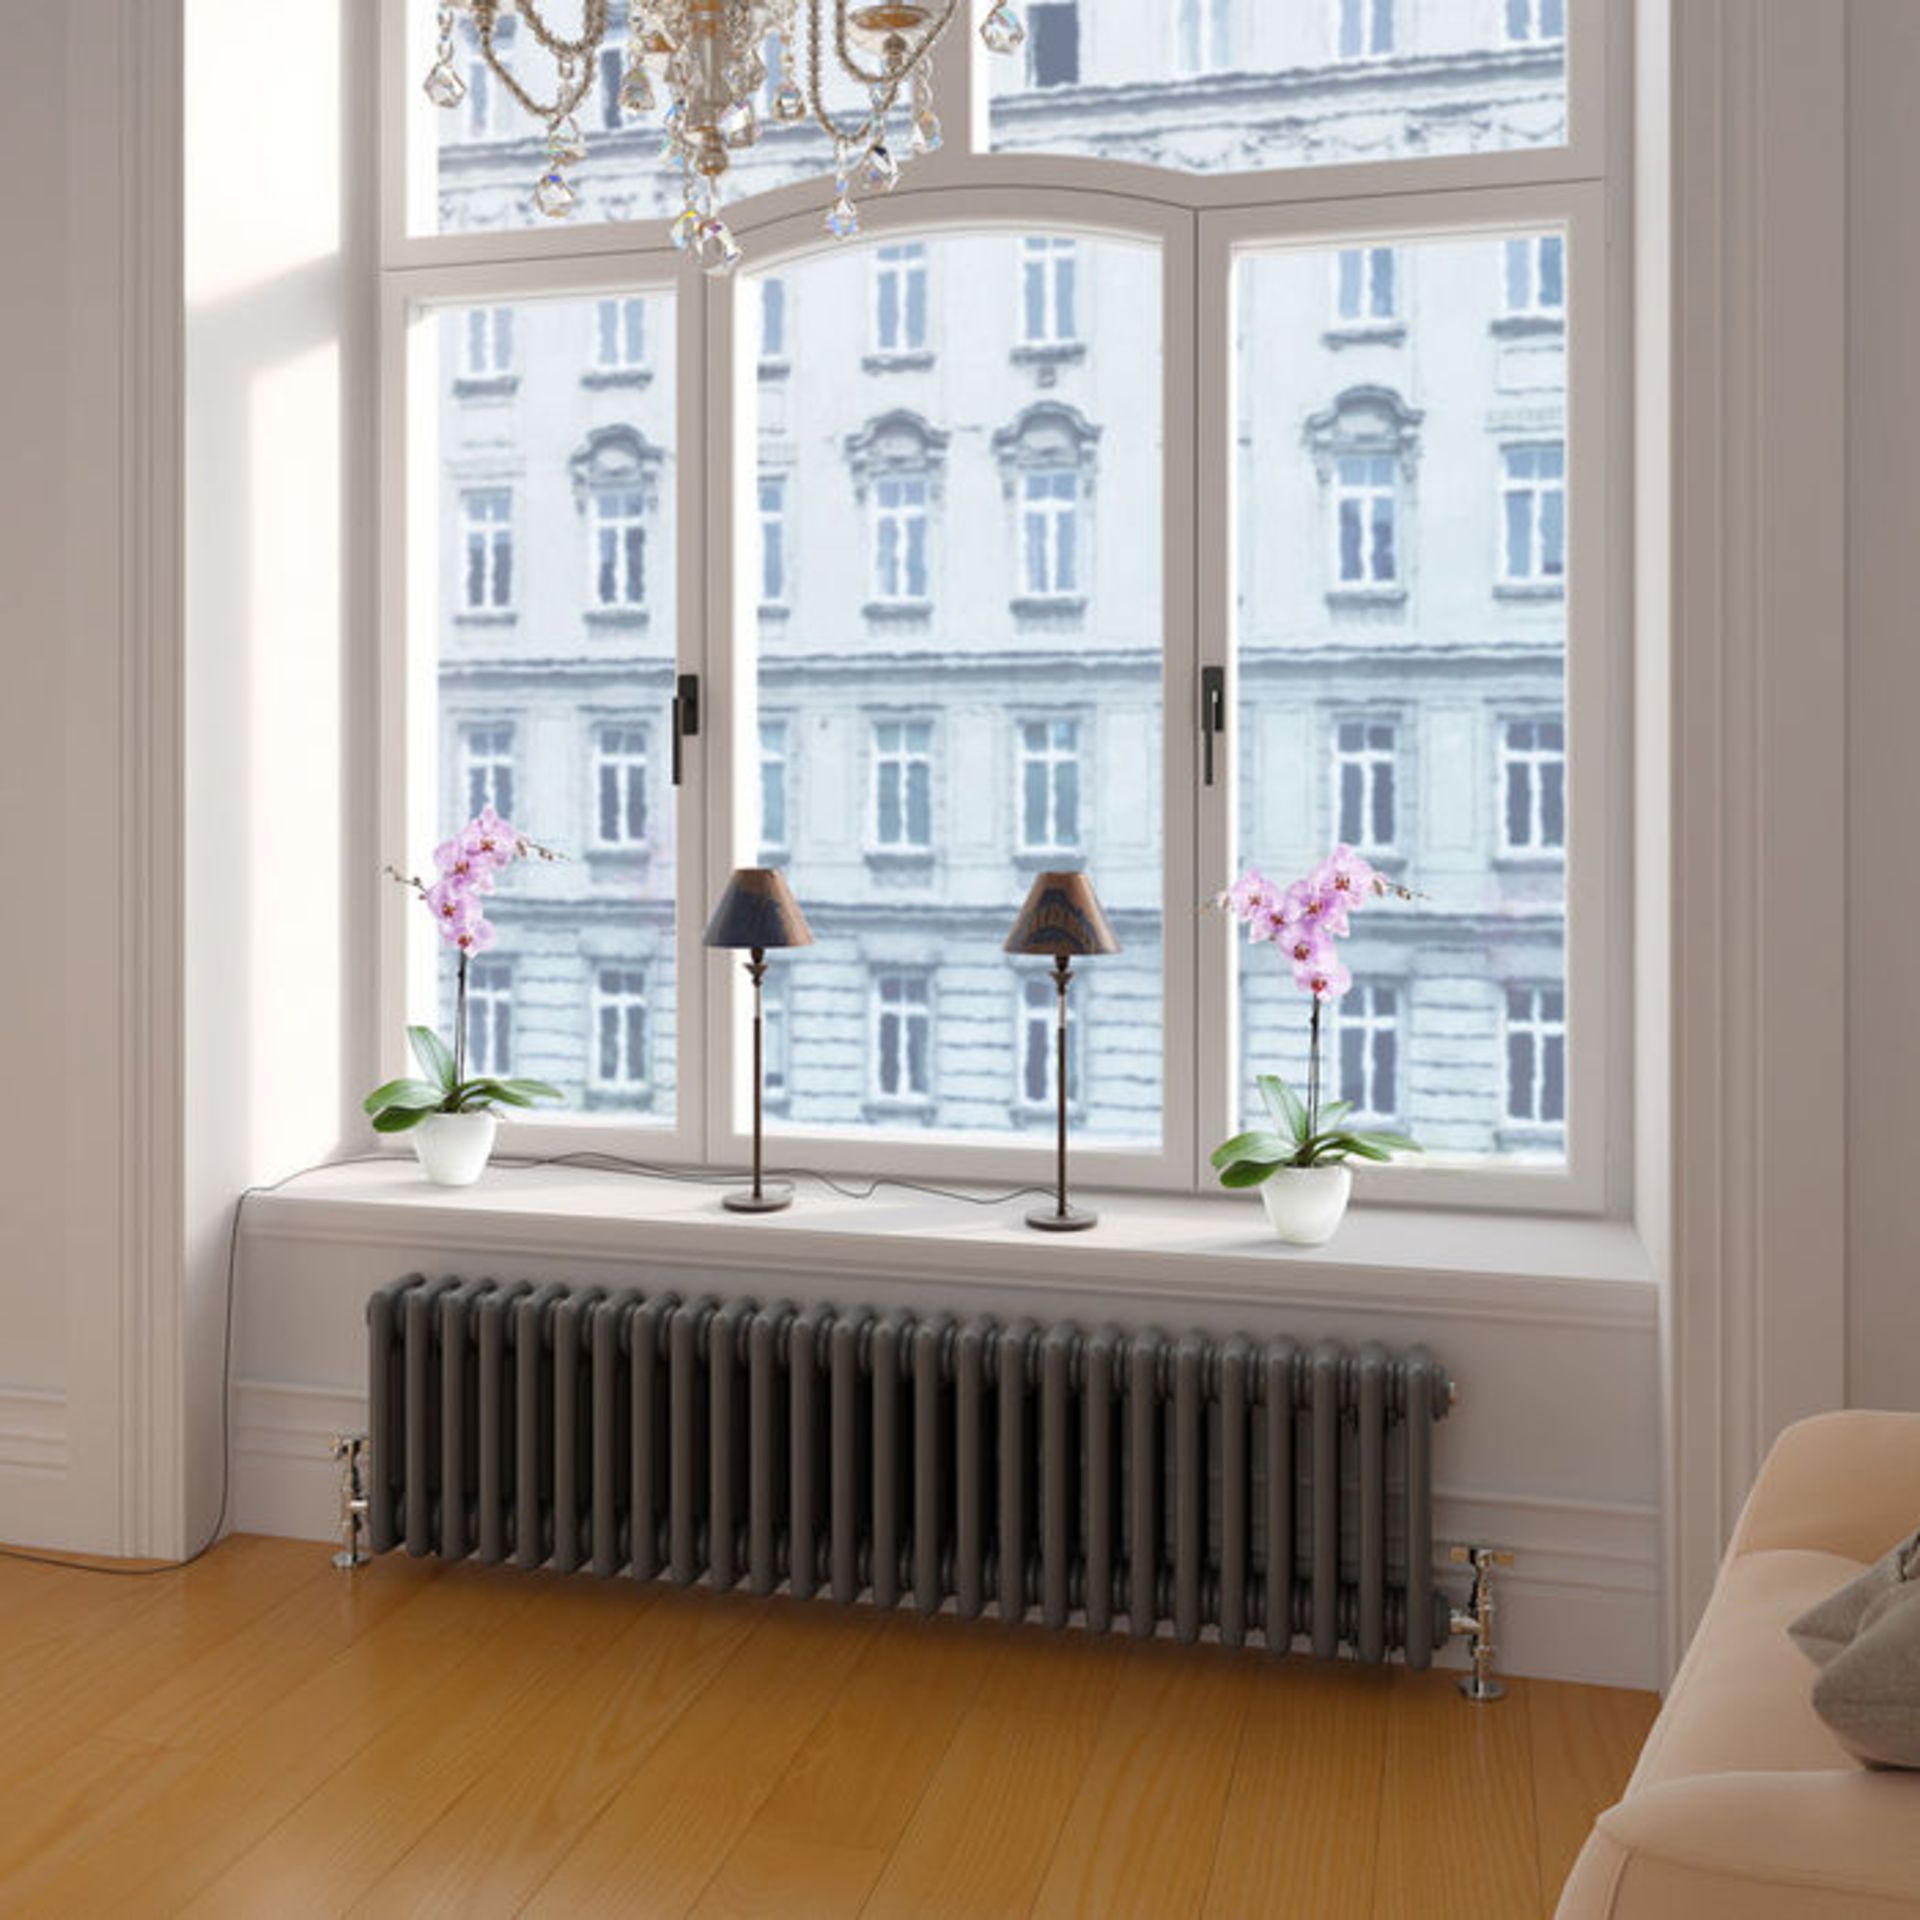 (DK29) 300x1188mm Anthracite Triple Panel Horizontal Colosseum Traditional Radiator. RRP £574.99. - Image 4 of 4